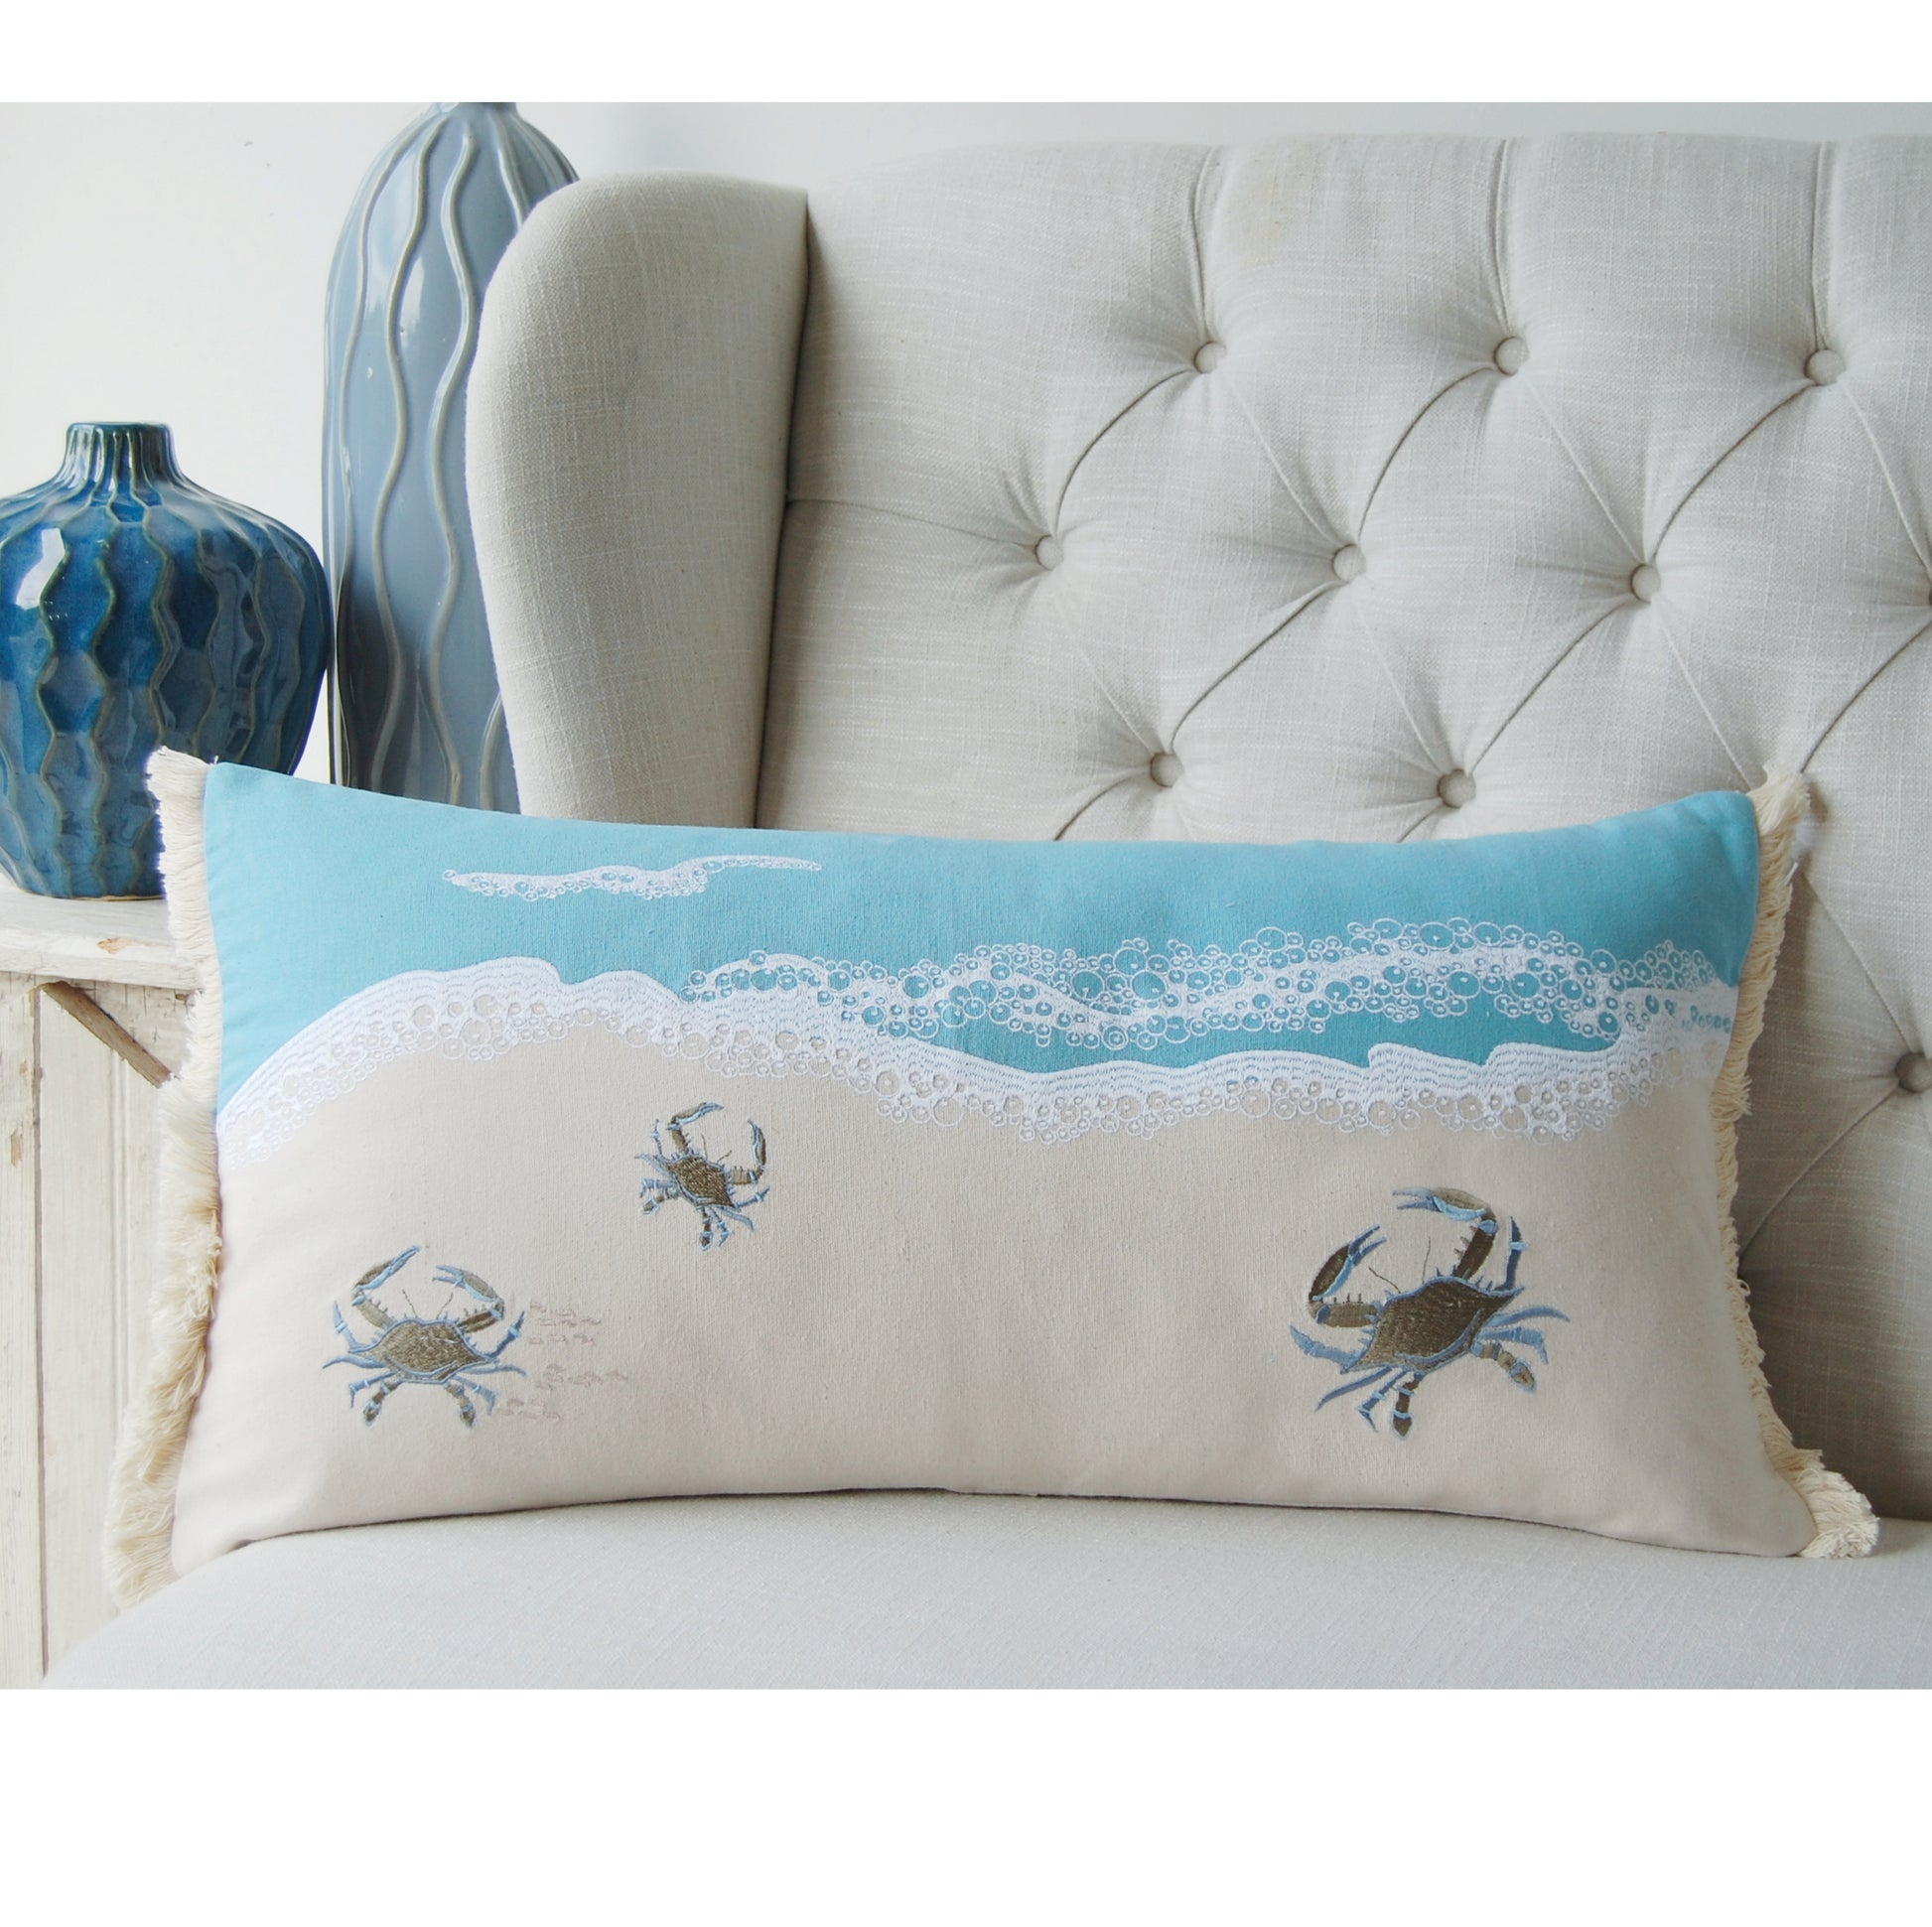 Crab with Waves Fringed Lumbar Pillow styled on a tufted couch.